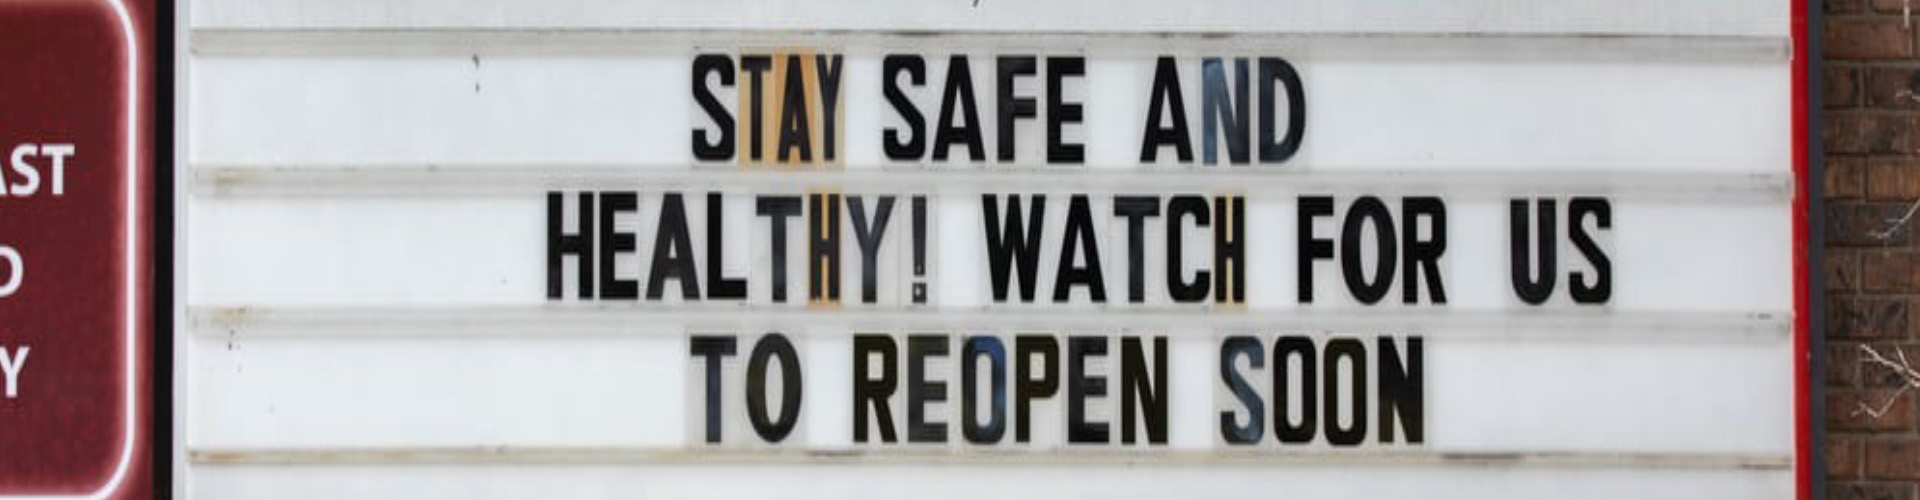 Reopened Retail: A Look Into Texas Shopping Life® Report Banner featuring sign outside of store that reads "Stay safe and healthy! Watch for us to reopen soon"